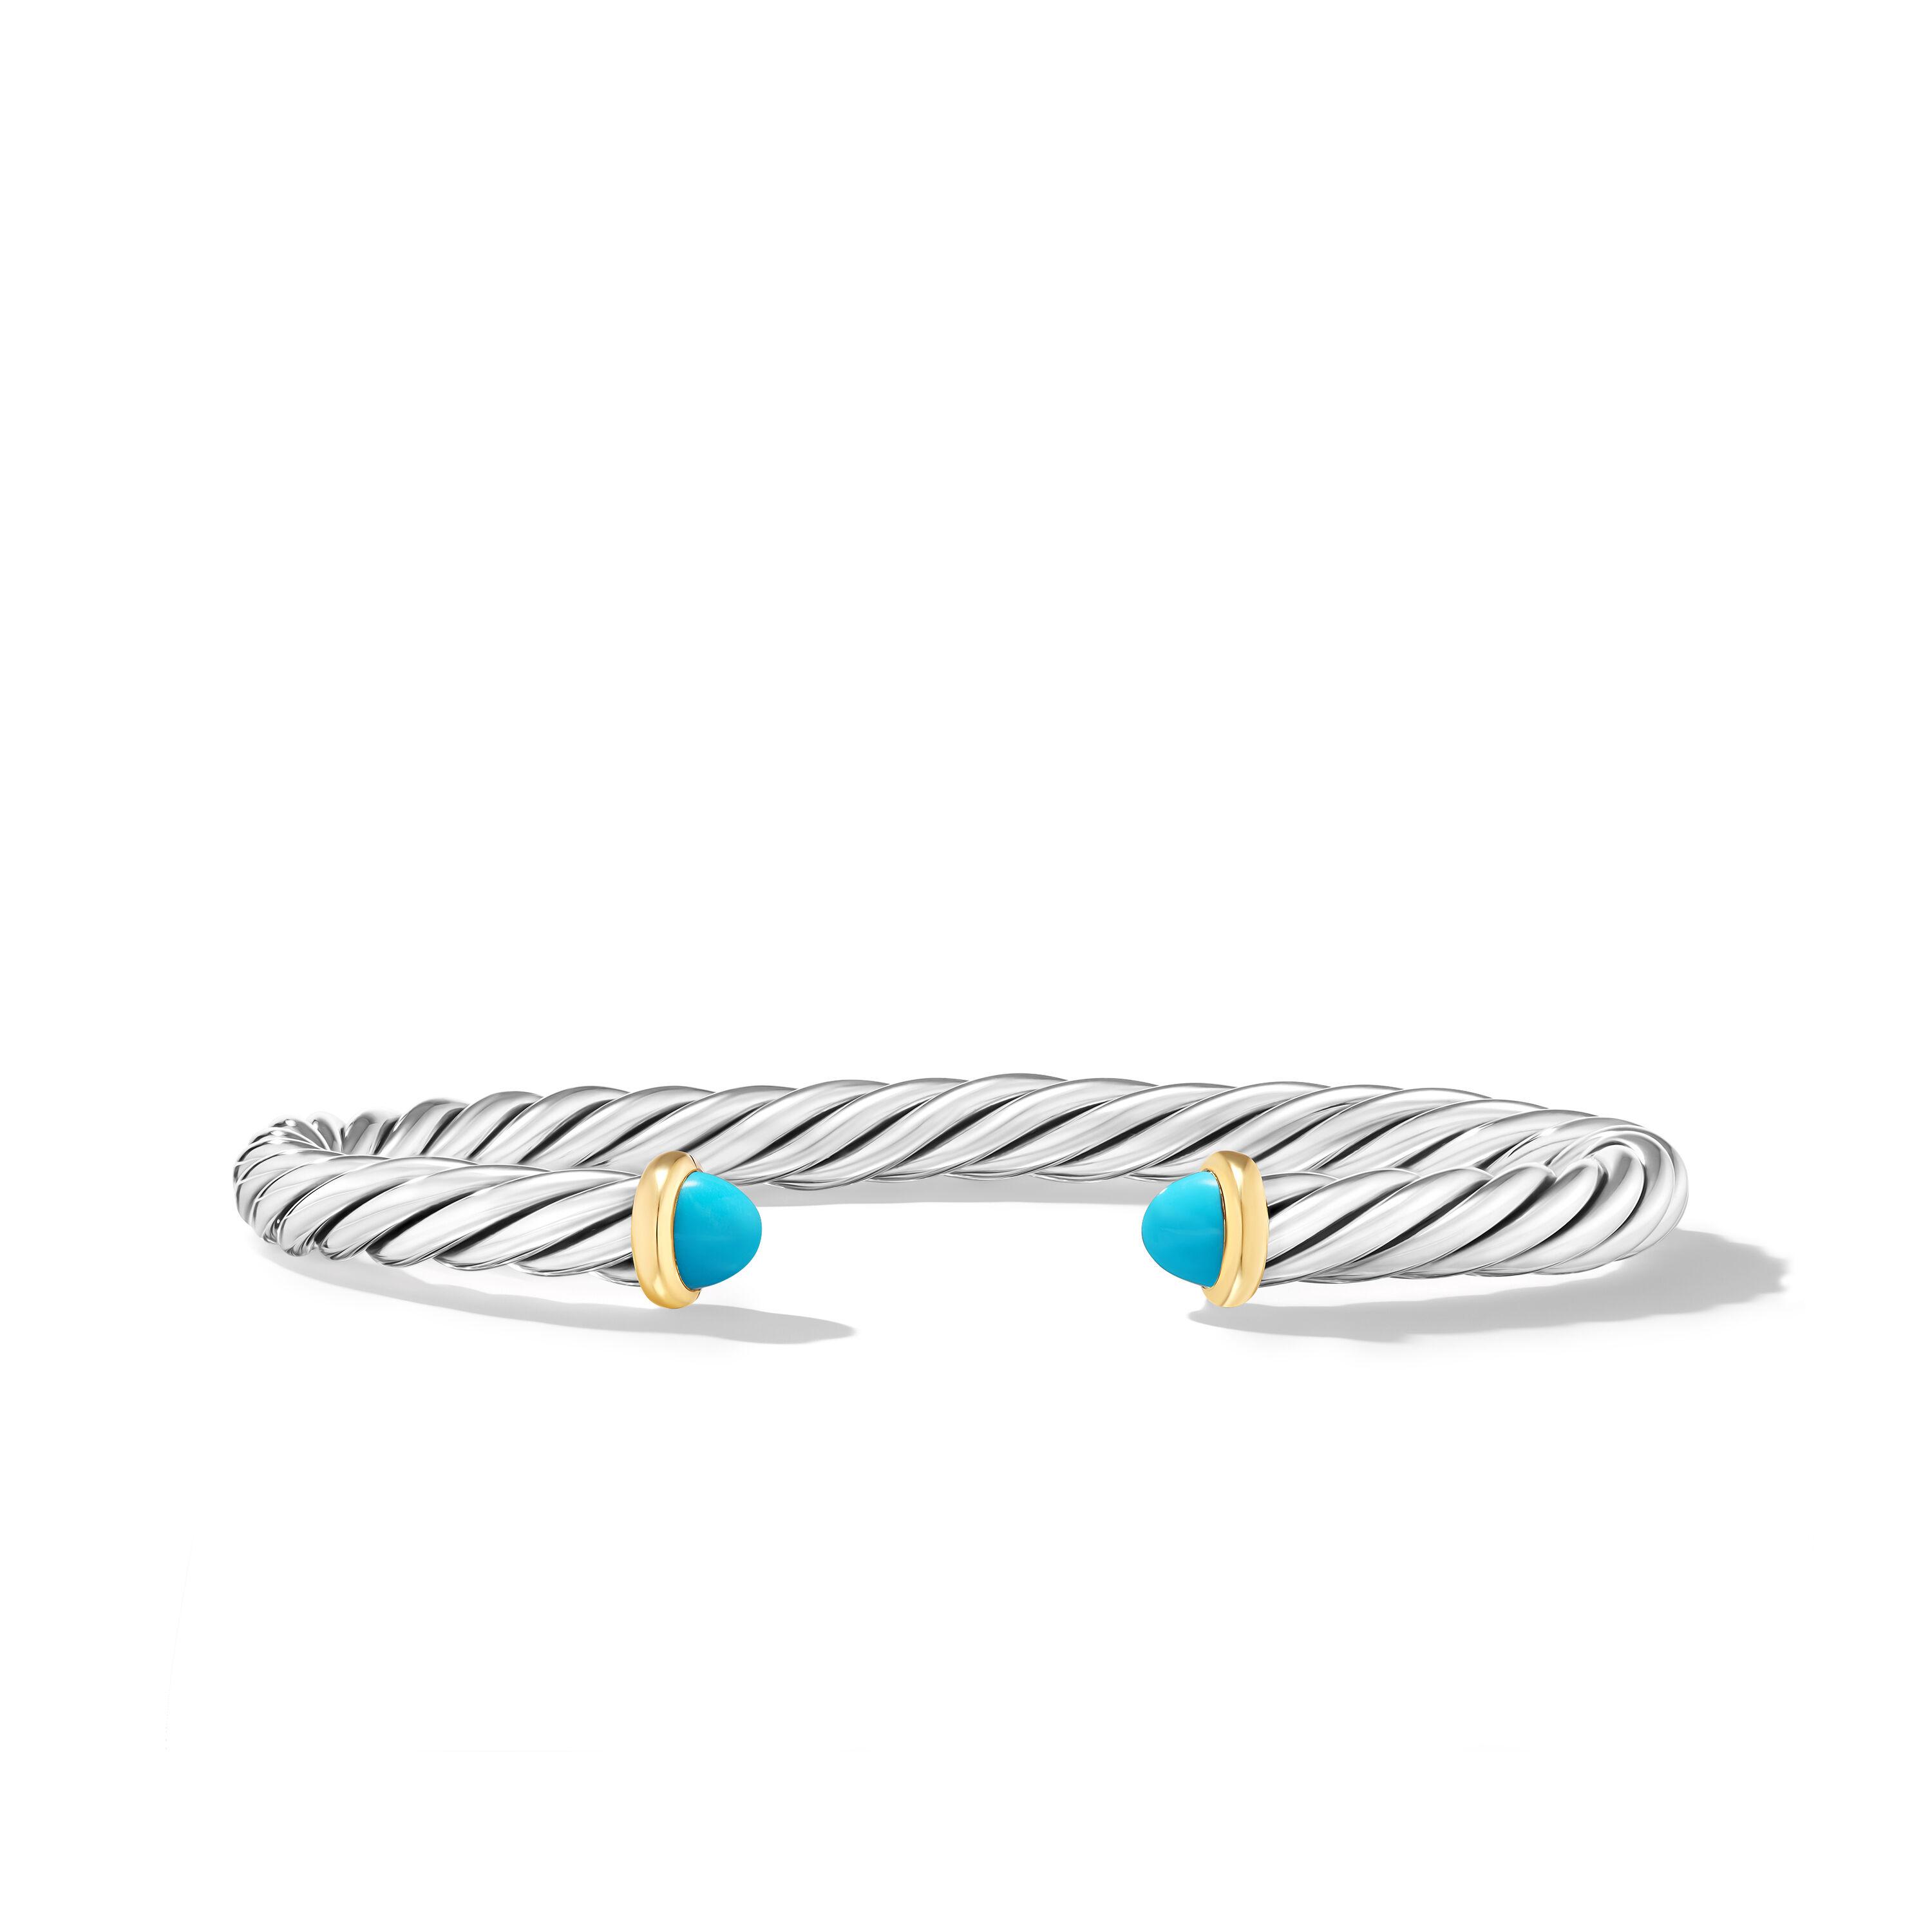 David Yurman 6mm Cable Cuff Bracelet in Sterling Silver with 14K Yellow Gold and Turquoise, Medium 0